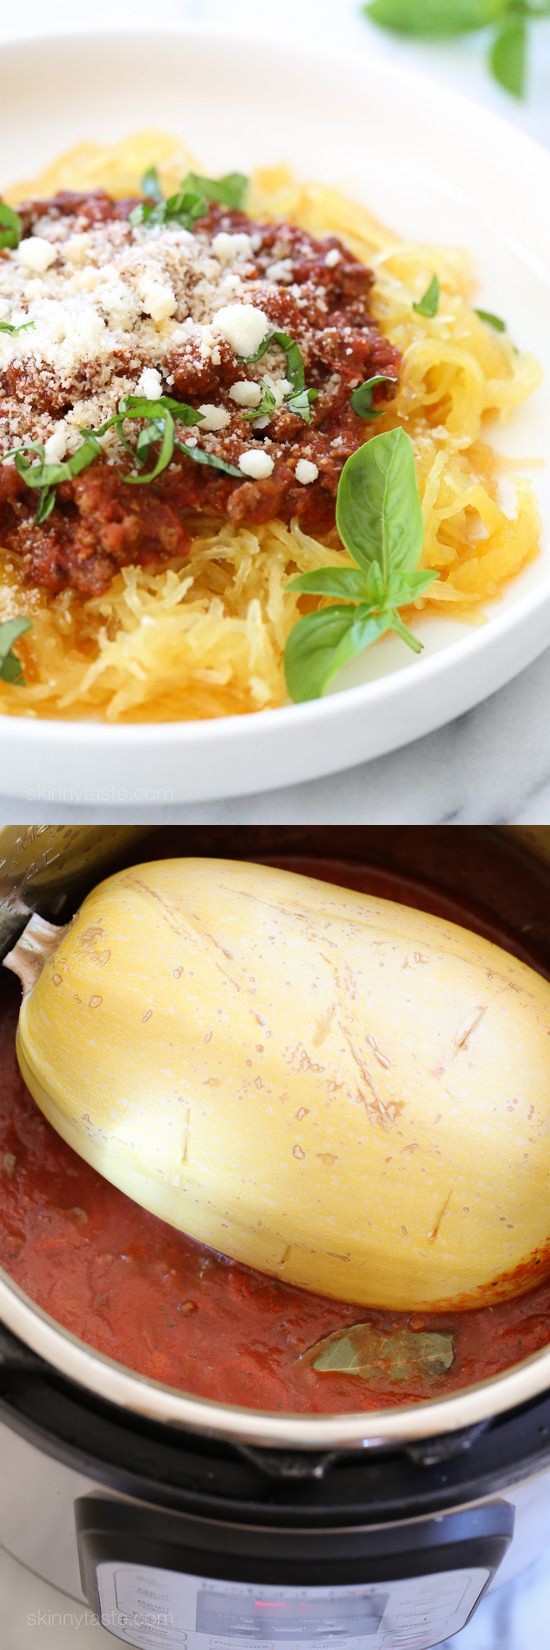 One-Pot Spaghetti Squash and Meat Sauce (Pressure Cooker and Slow Cooker